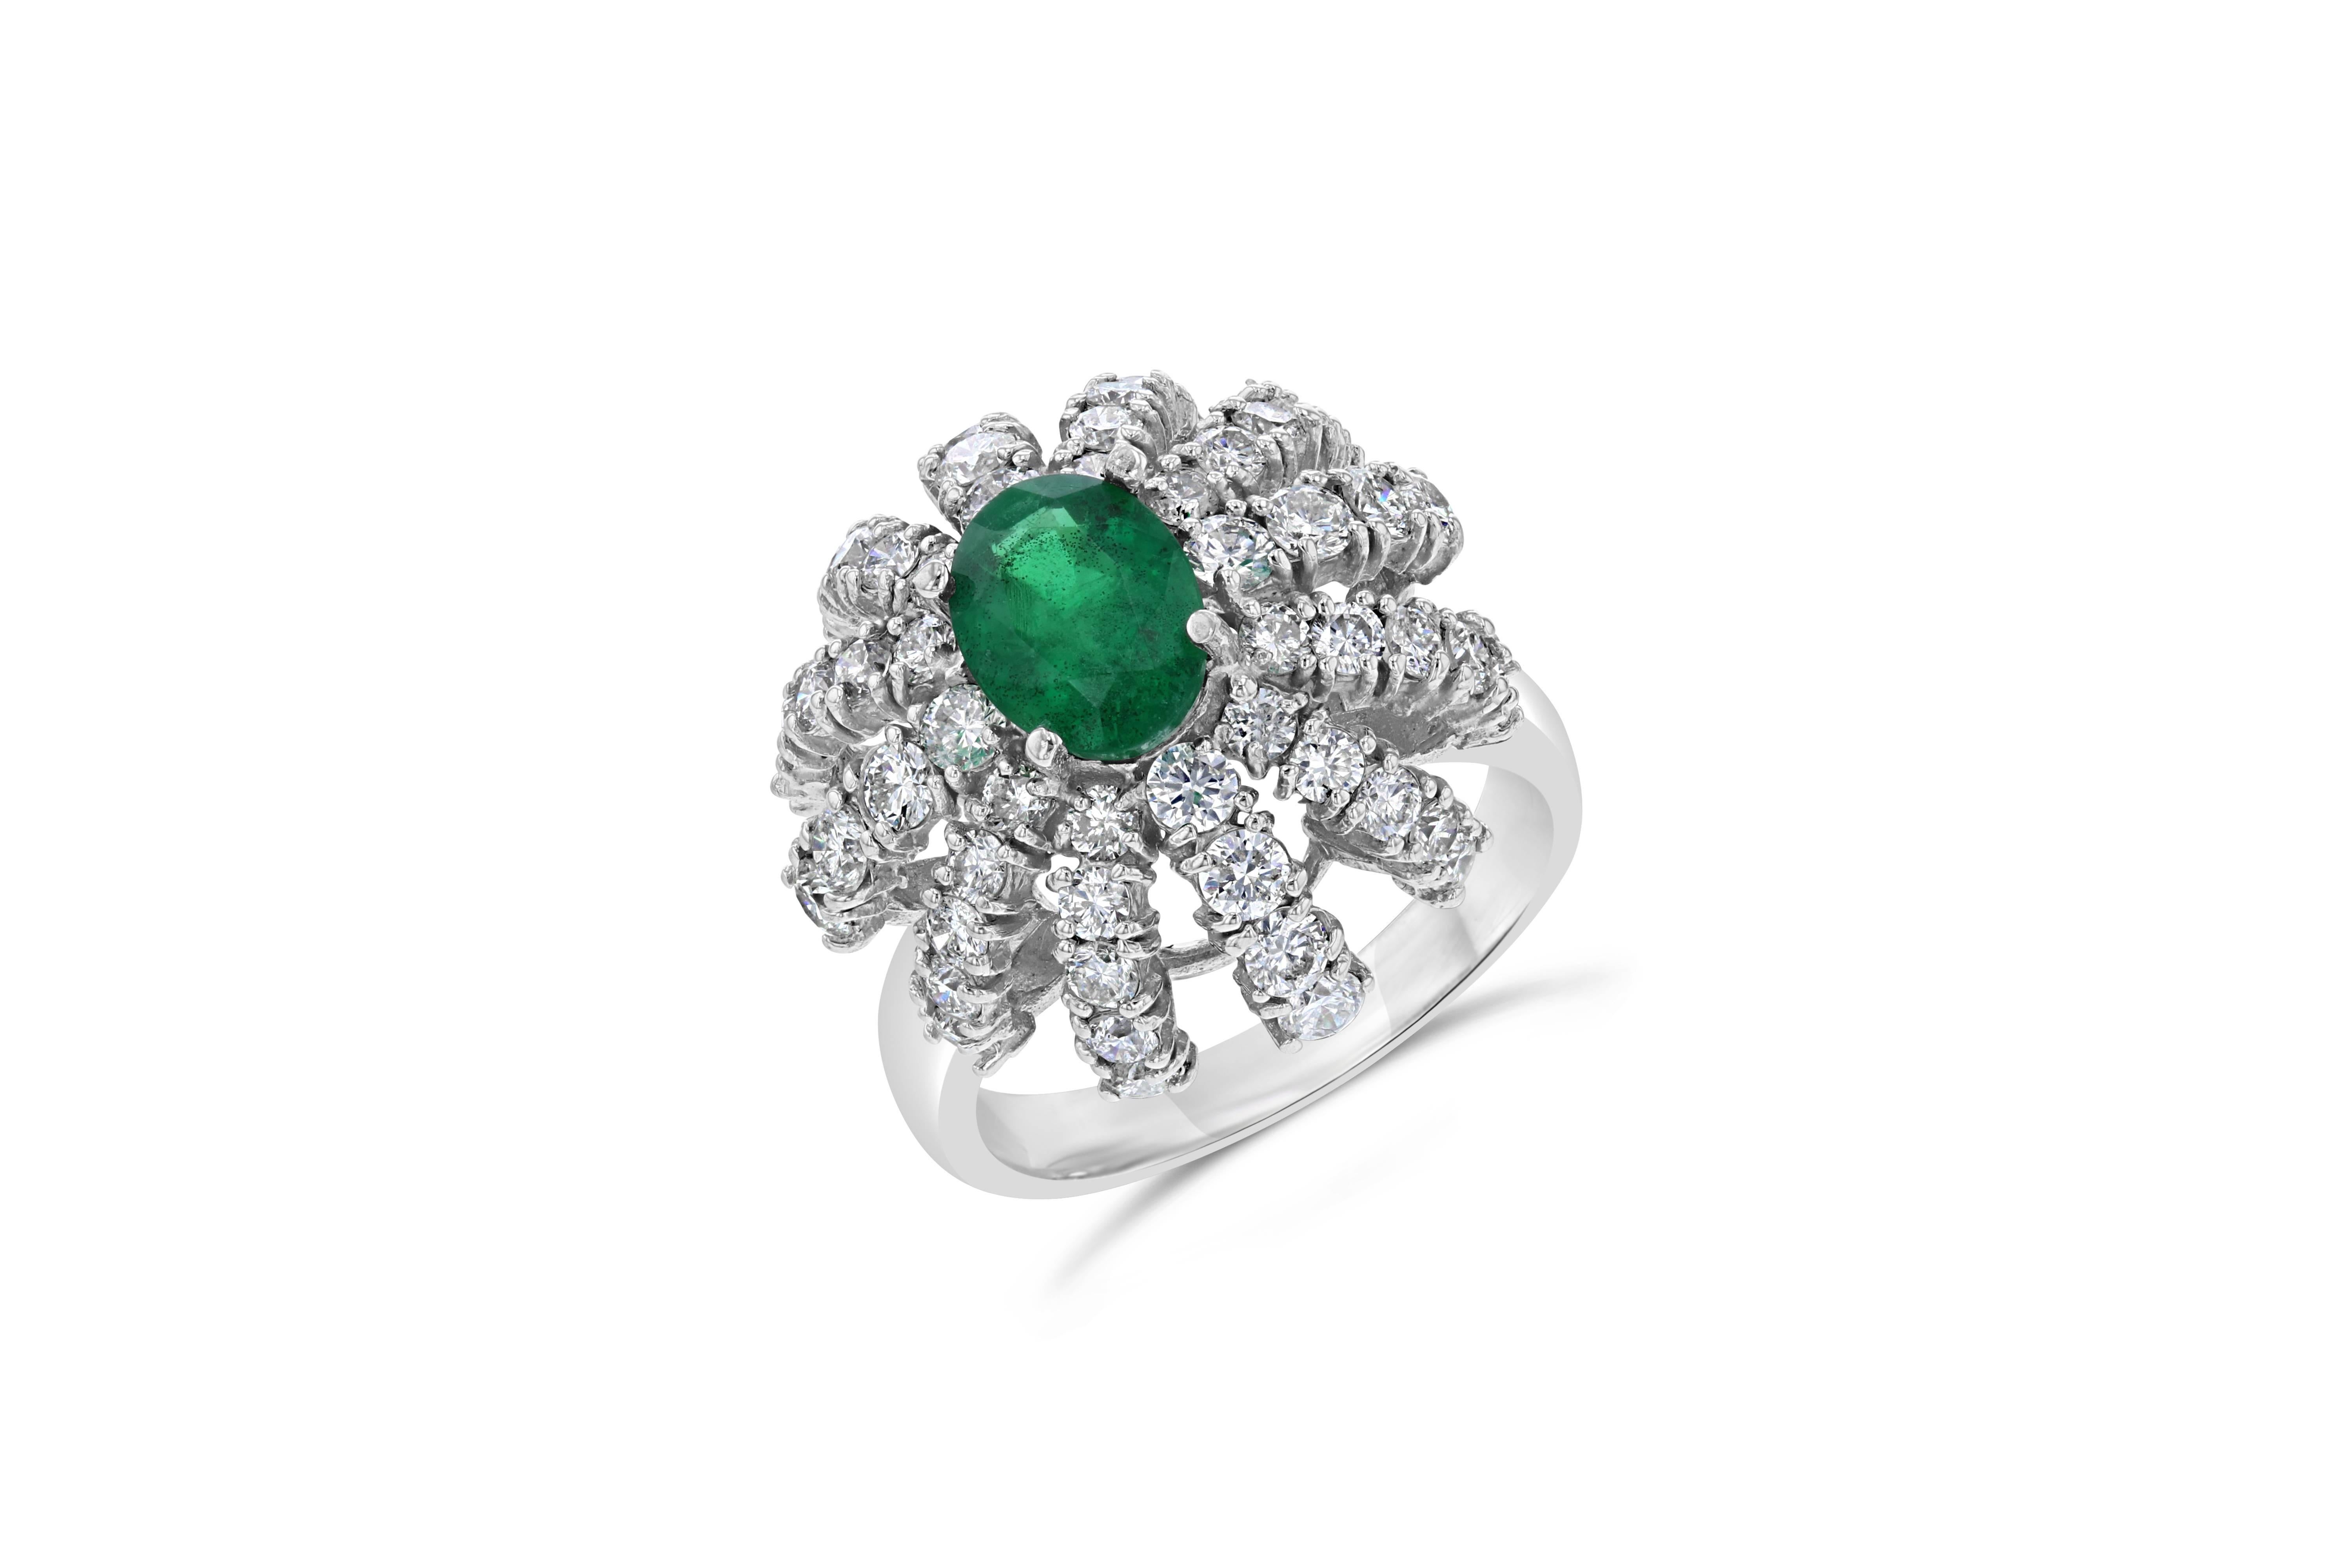 Inspiring vintage beauty with a modern flair! 
This ring has a natural Emerald that is 1.21 Carats surrounded by a falling dome of Round Cut Diamonds weighing 1.77 Carats. It is set in 14K White Gold and weighs 6.5 grams. The ring is a size 6 and